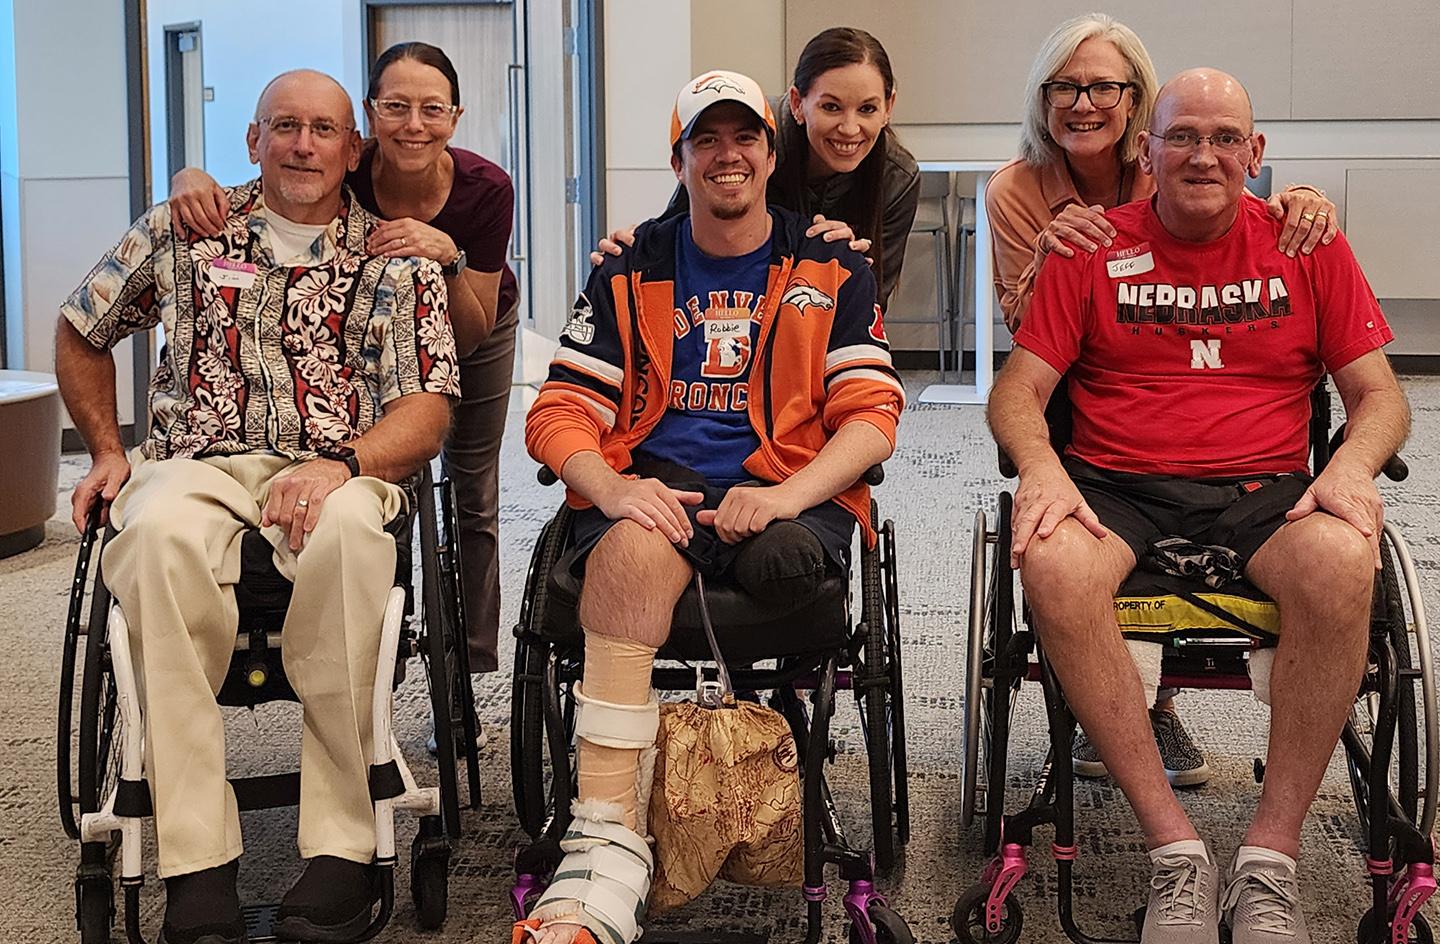 Three men who use wheelchairs smile as three women stand behind them.